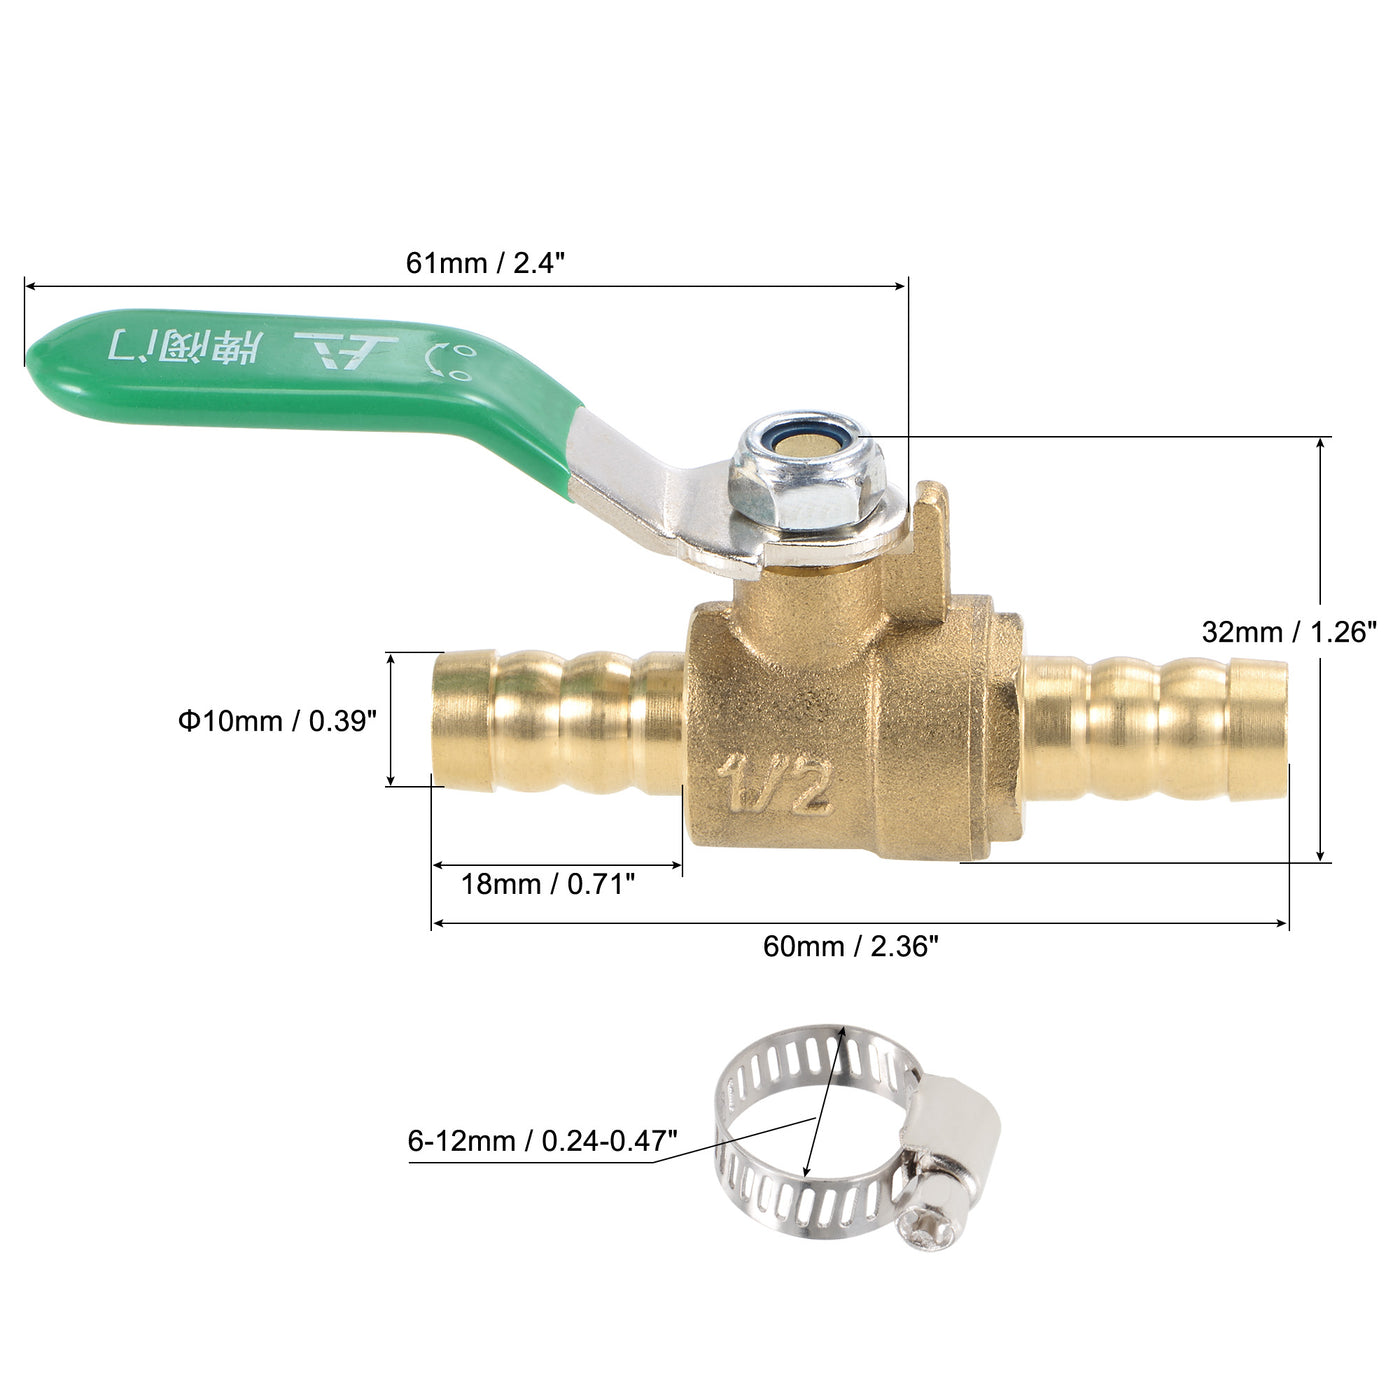 Uxcell Uxcell Brass Air Ball Valve Shut Off Switch 12mm Hose Barb to 12mm Hose Barb with Clamps Green Handle